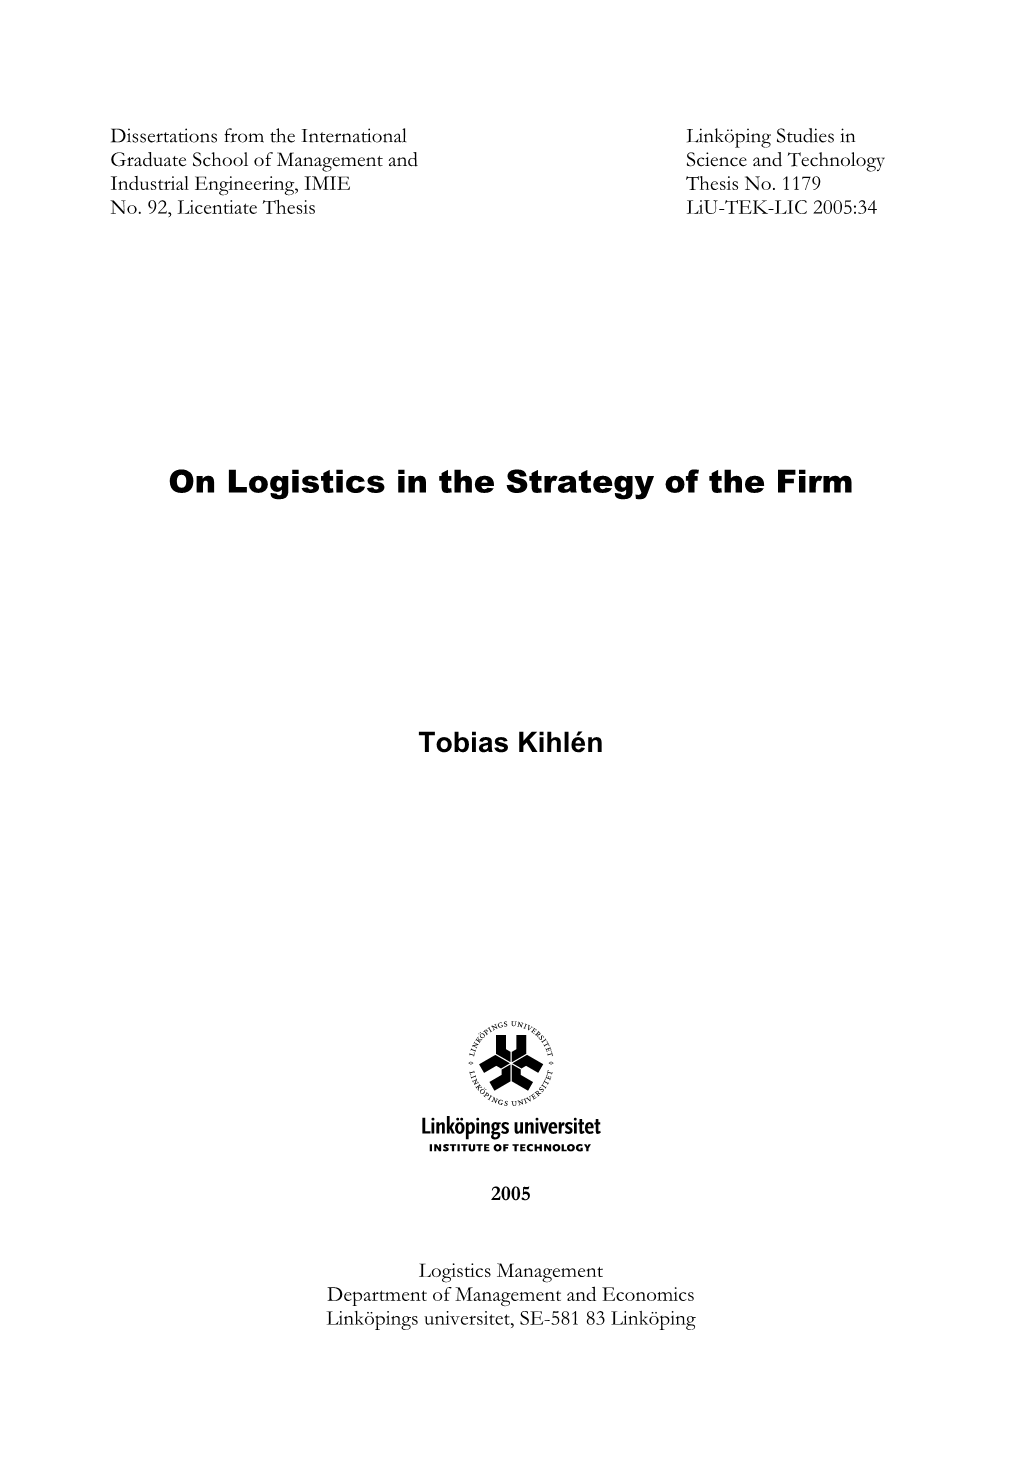 On Logistics in the Strategy of the Firm